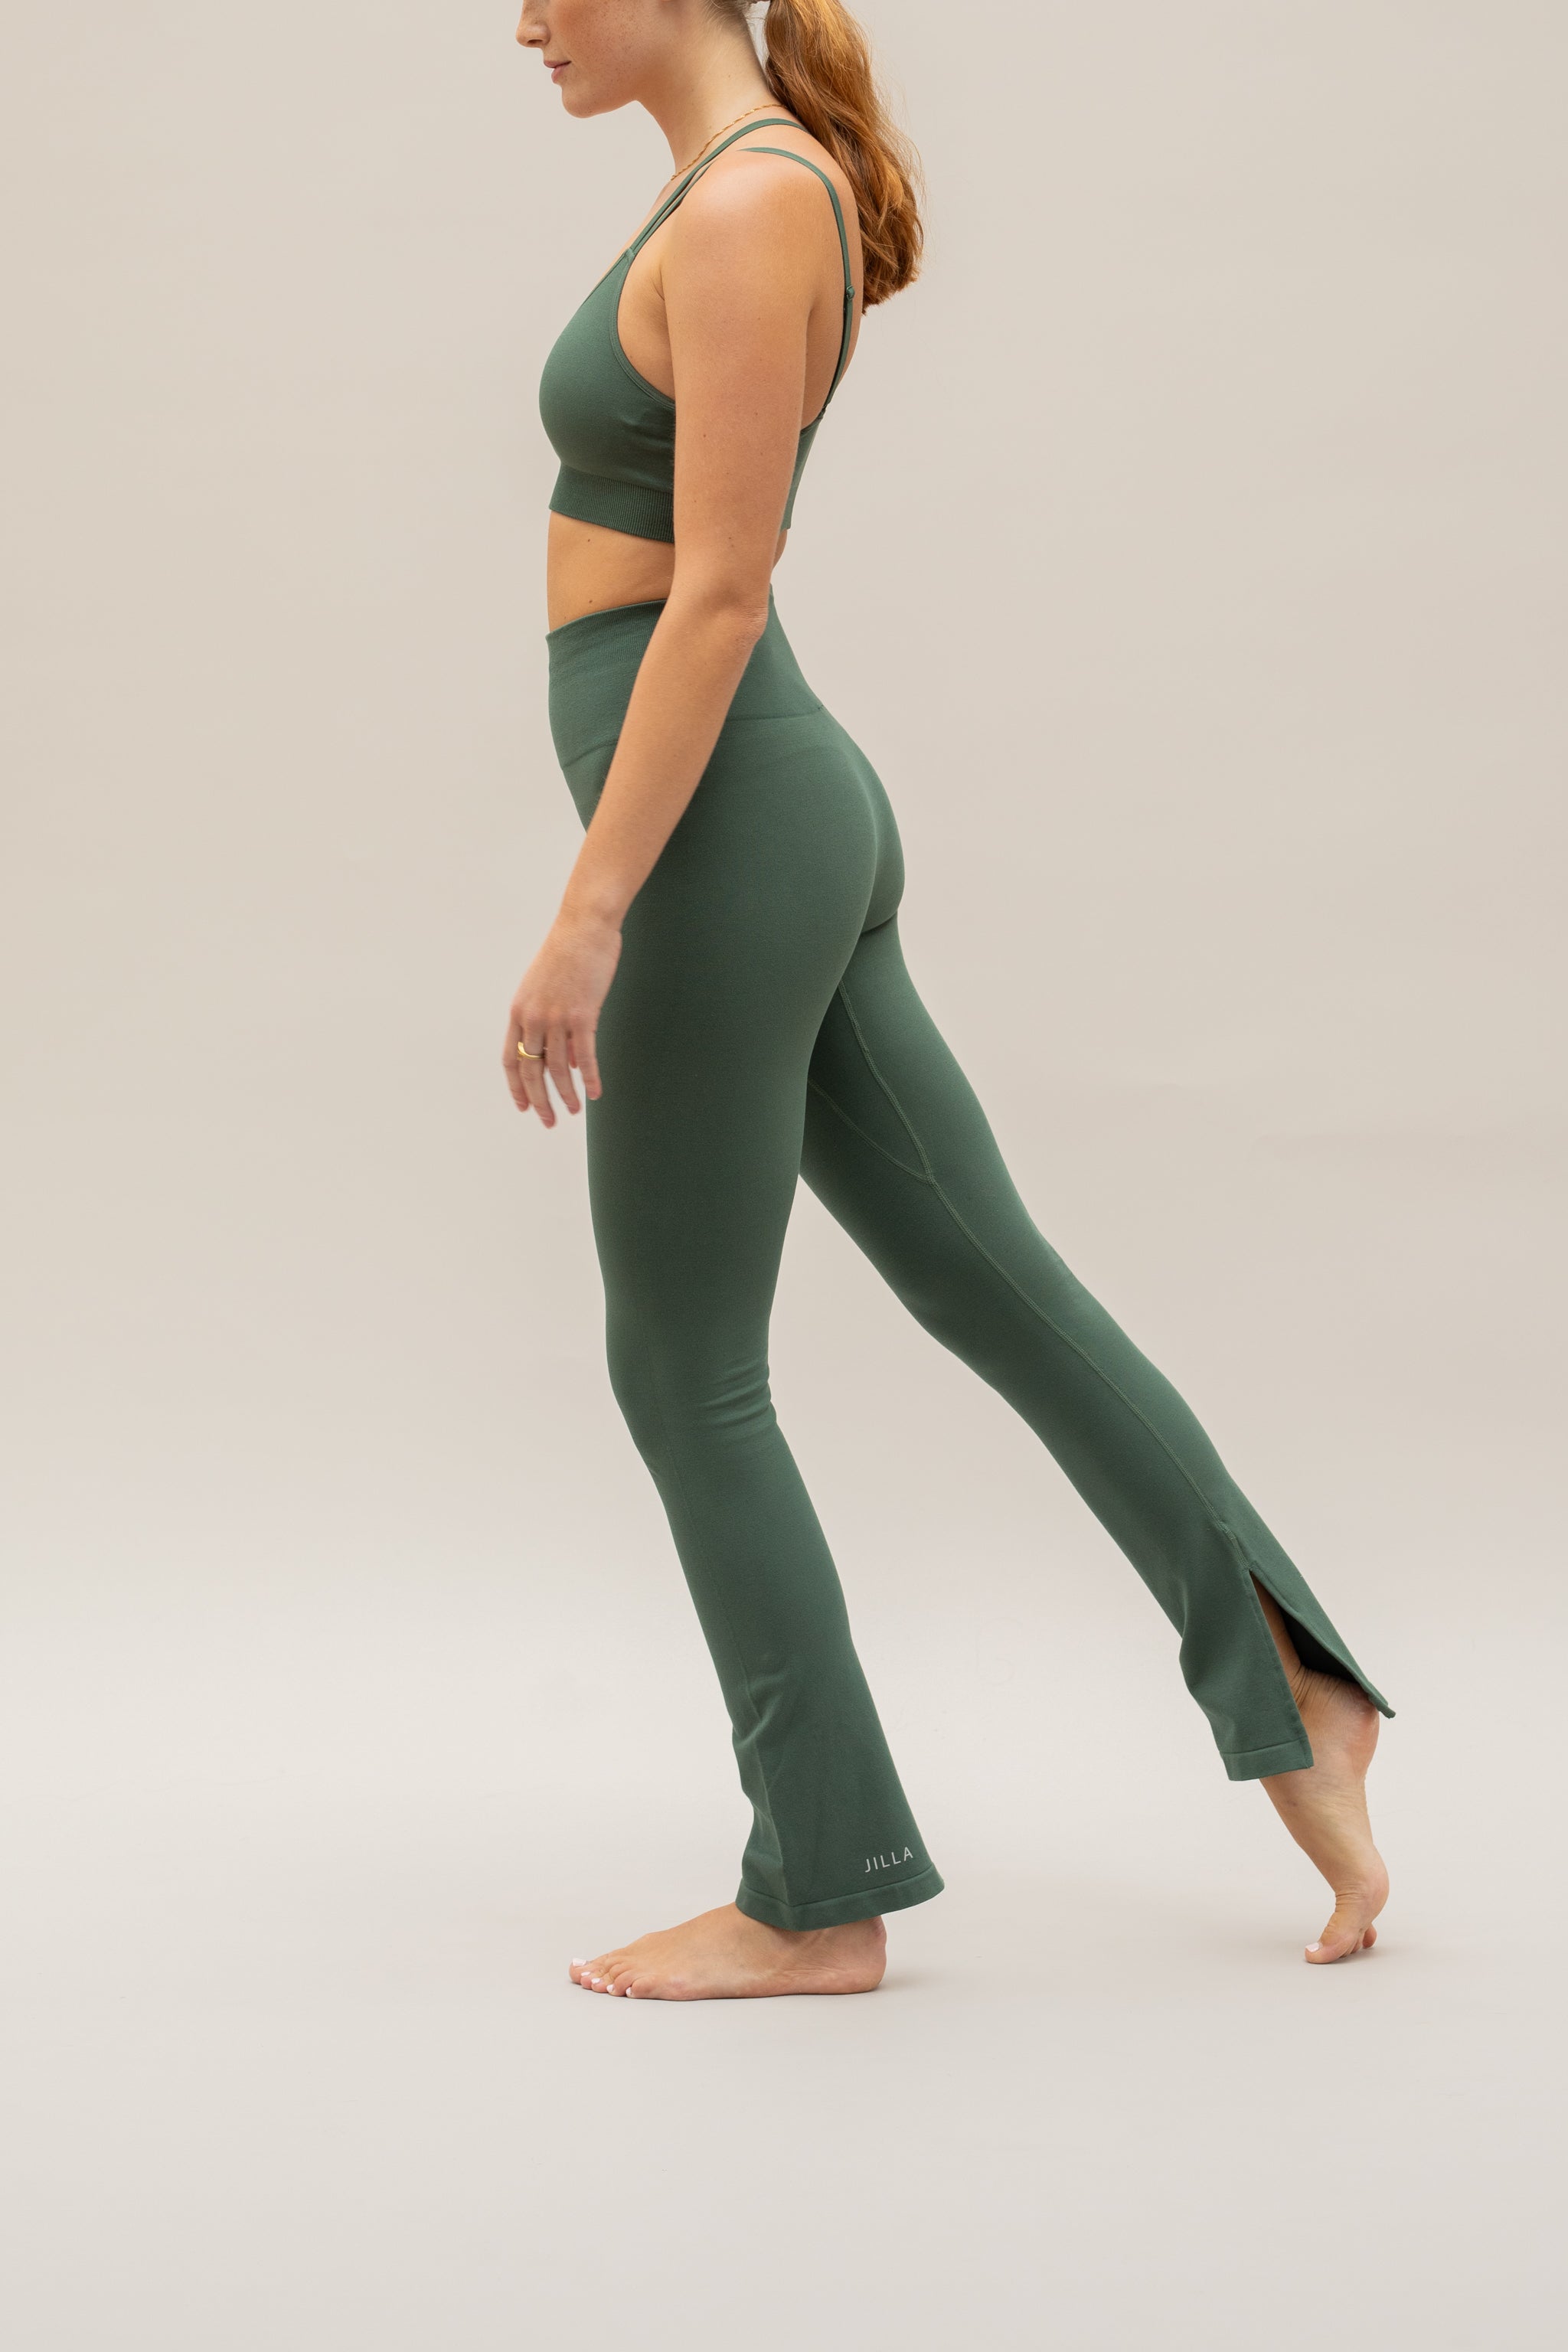 Green supportive sports bra top and green flare leggings from sustainable activewear brand, Jilla. 